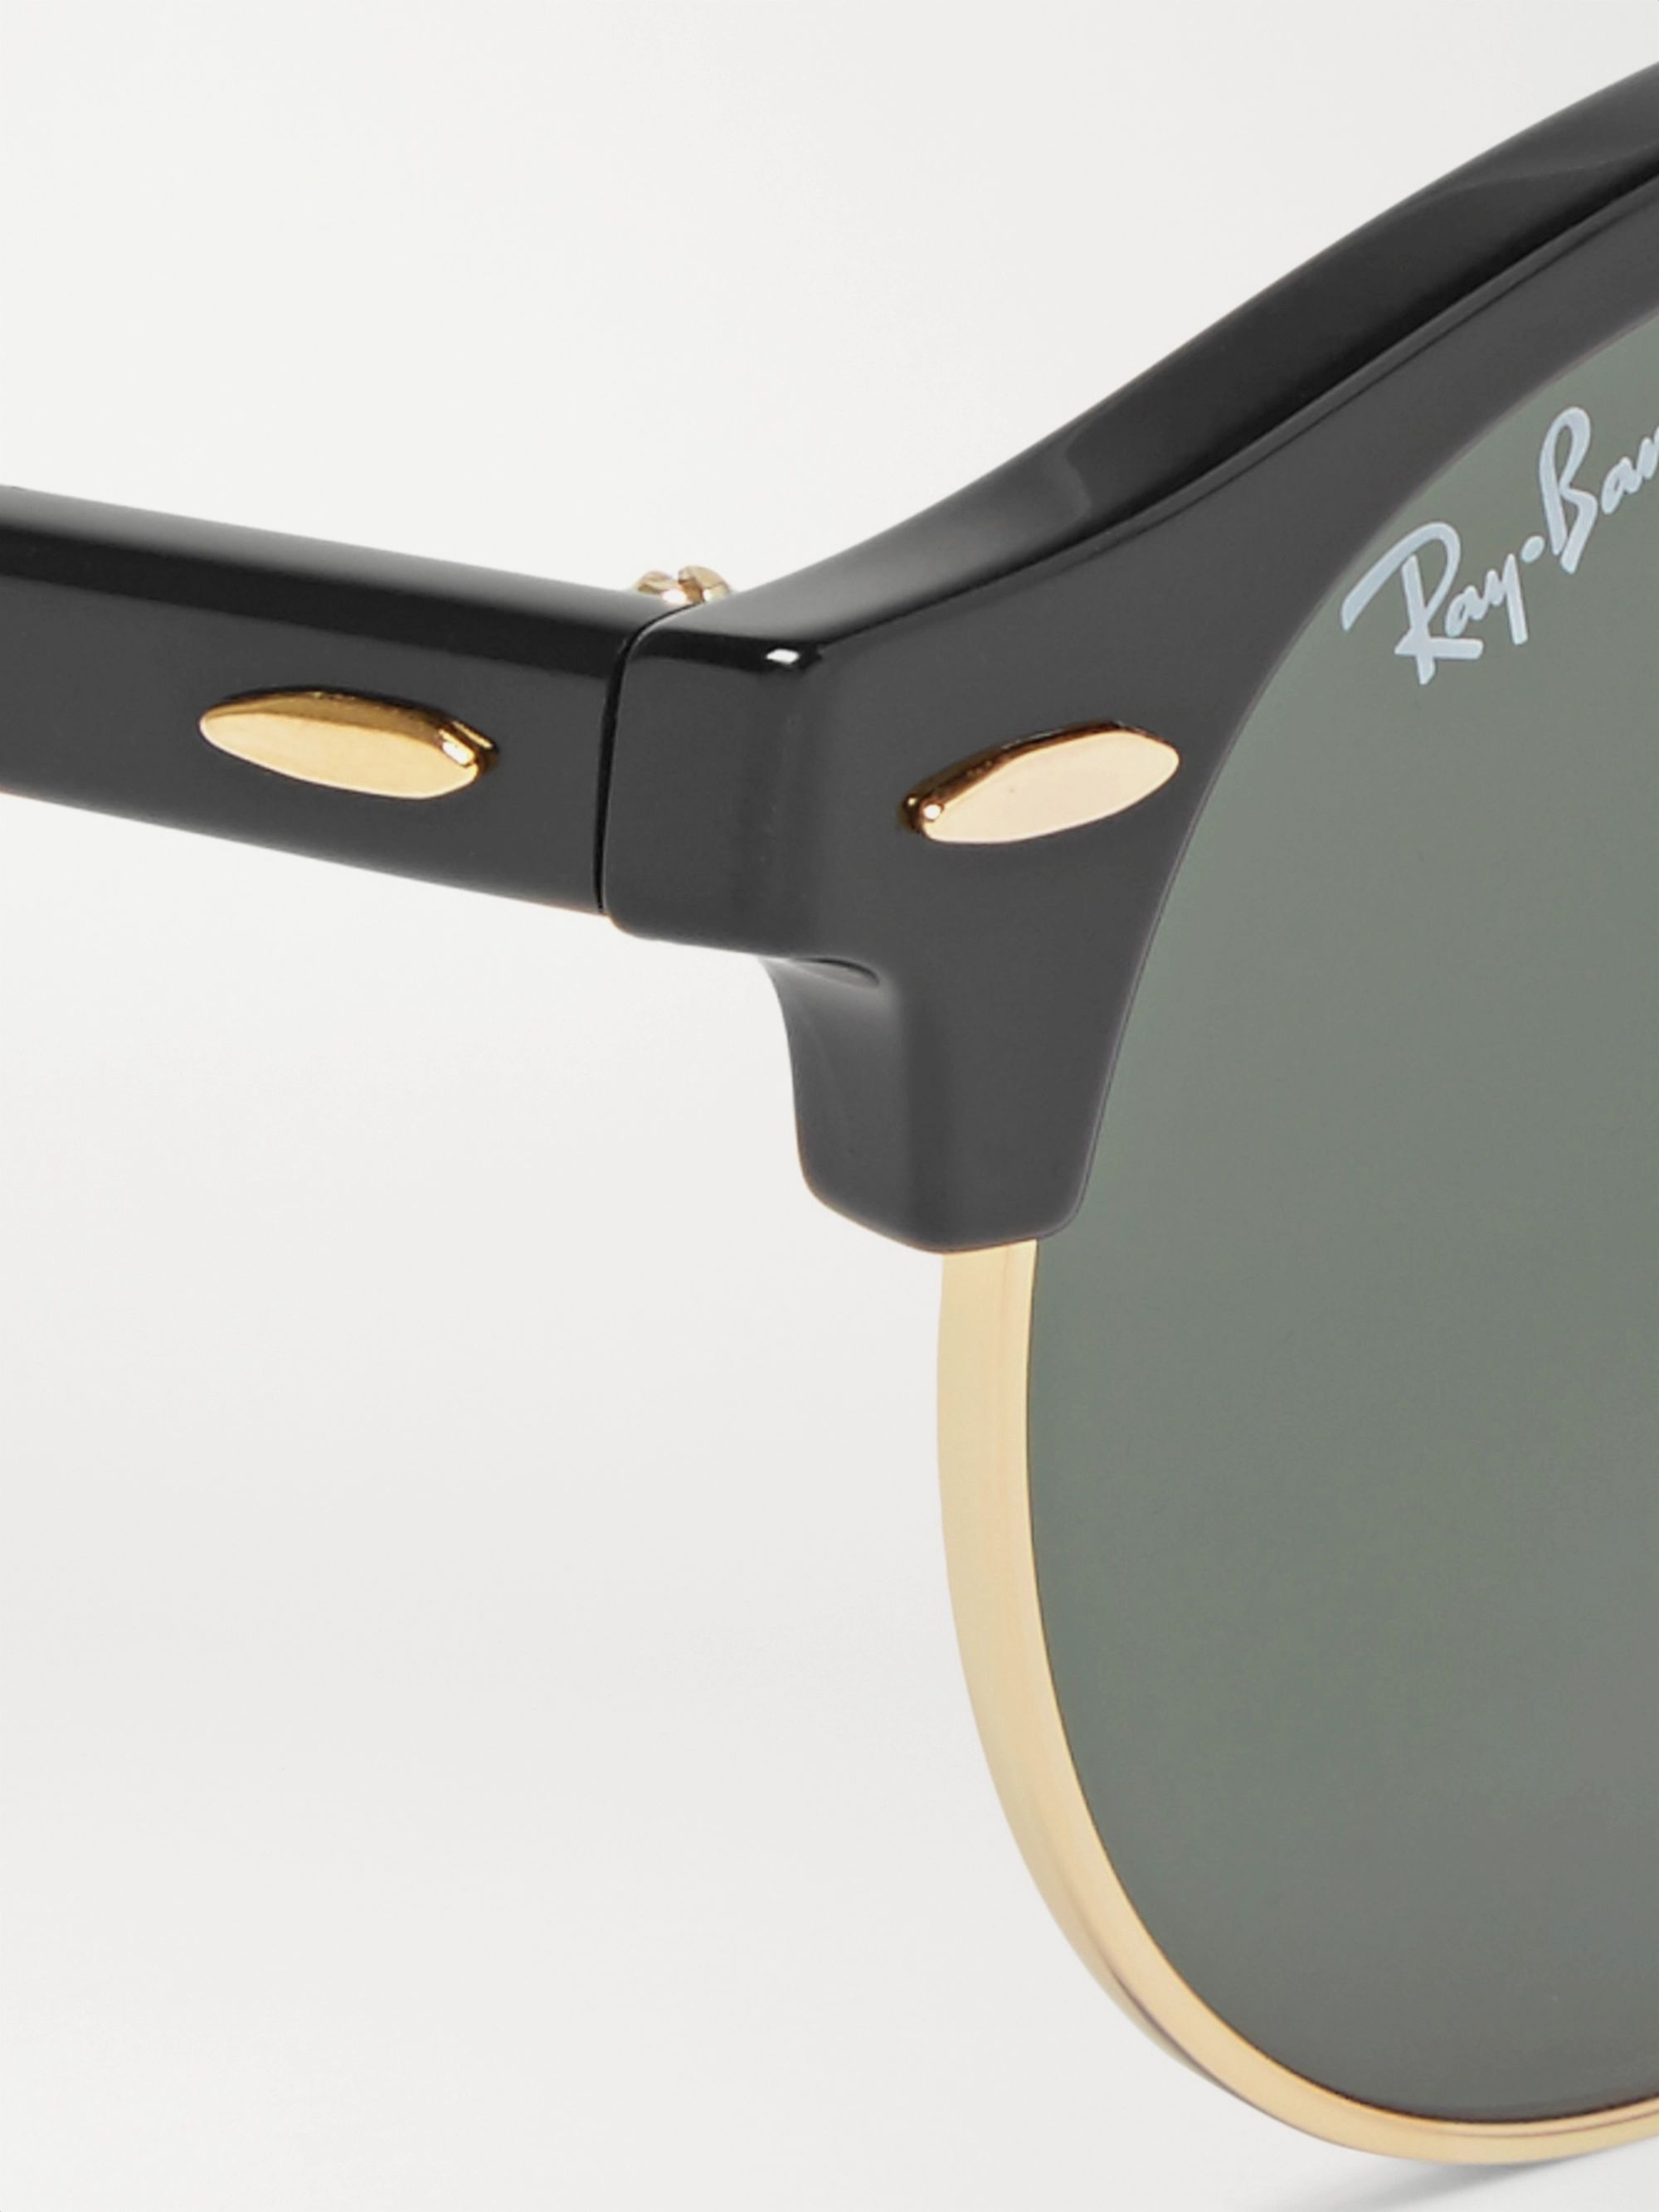 ray ban sunglasses exchange offer Shop 